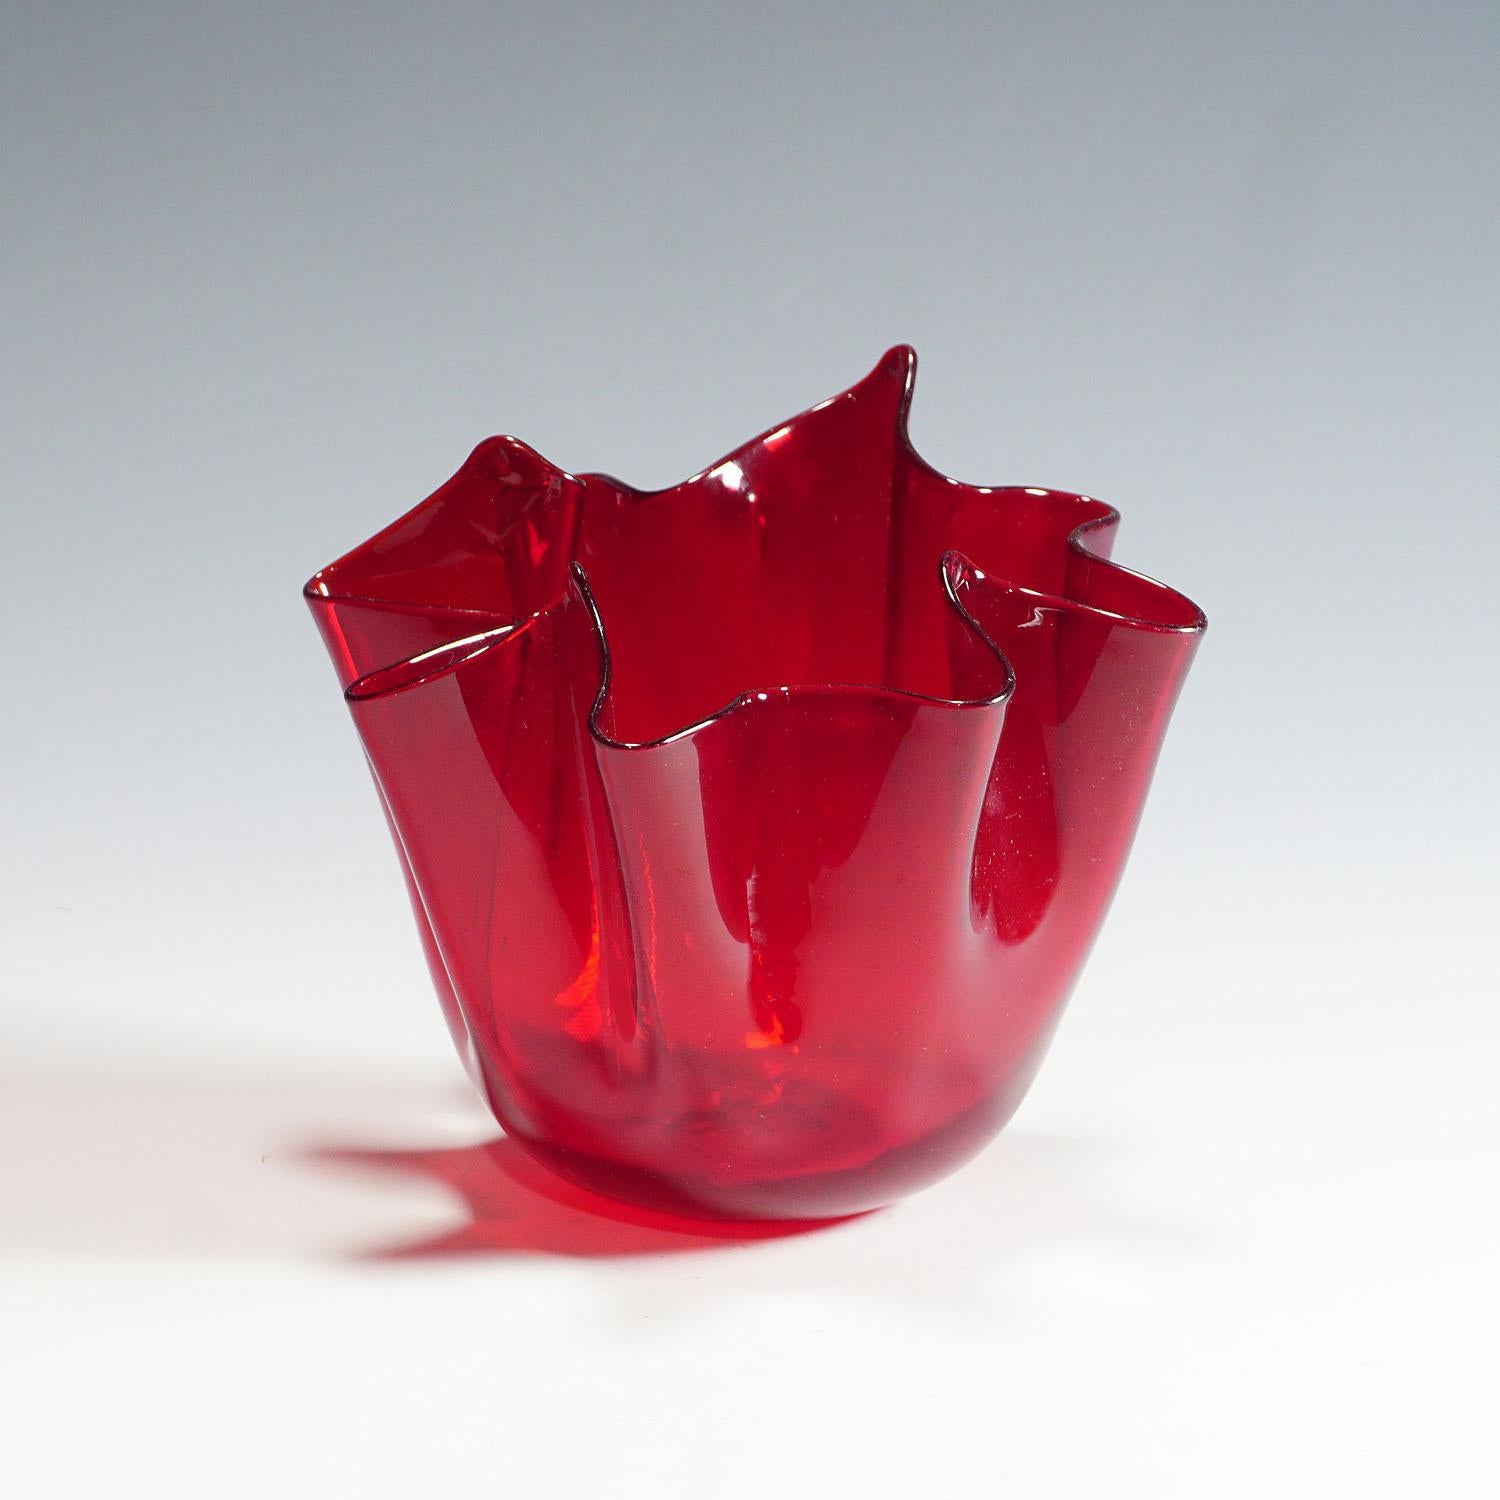 A vintage Fazzoletto (handkerchief) vase in transparent red glass. Manufactured ca. 1950s by Venini, Venice after a design of Fulvio Bianconi. On the base with round acid etched signature 'venini ITALY murano'. Venini model number 3927. An iconic